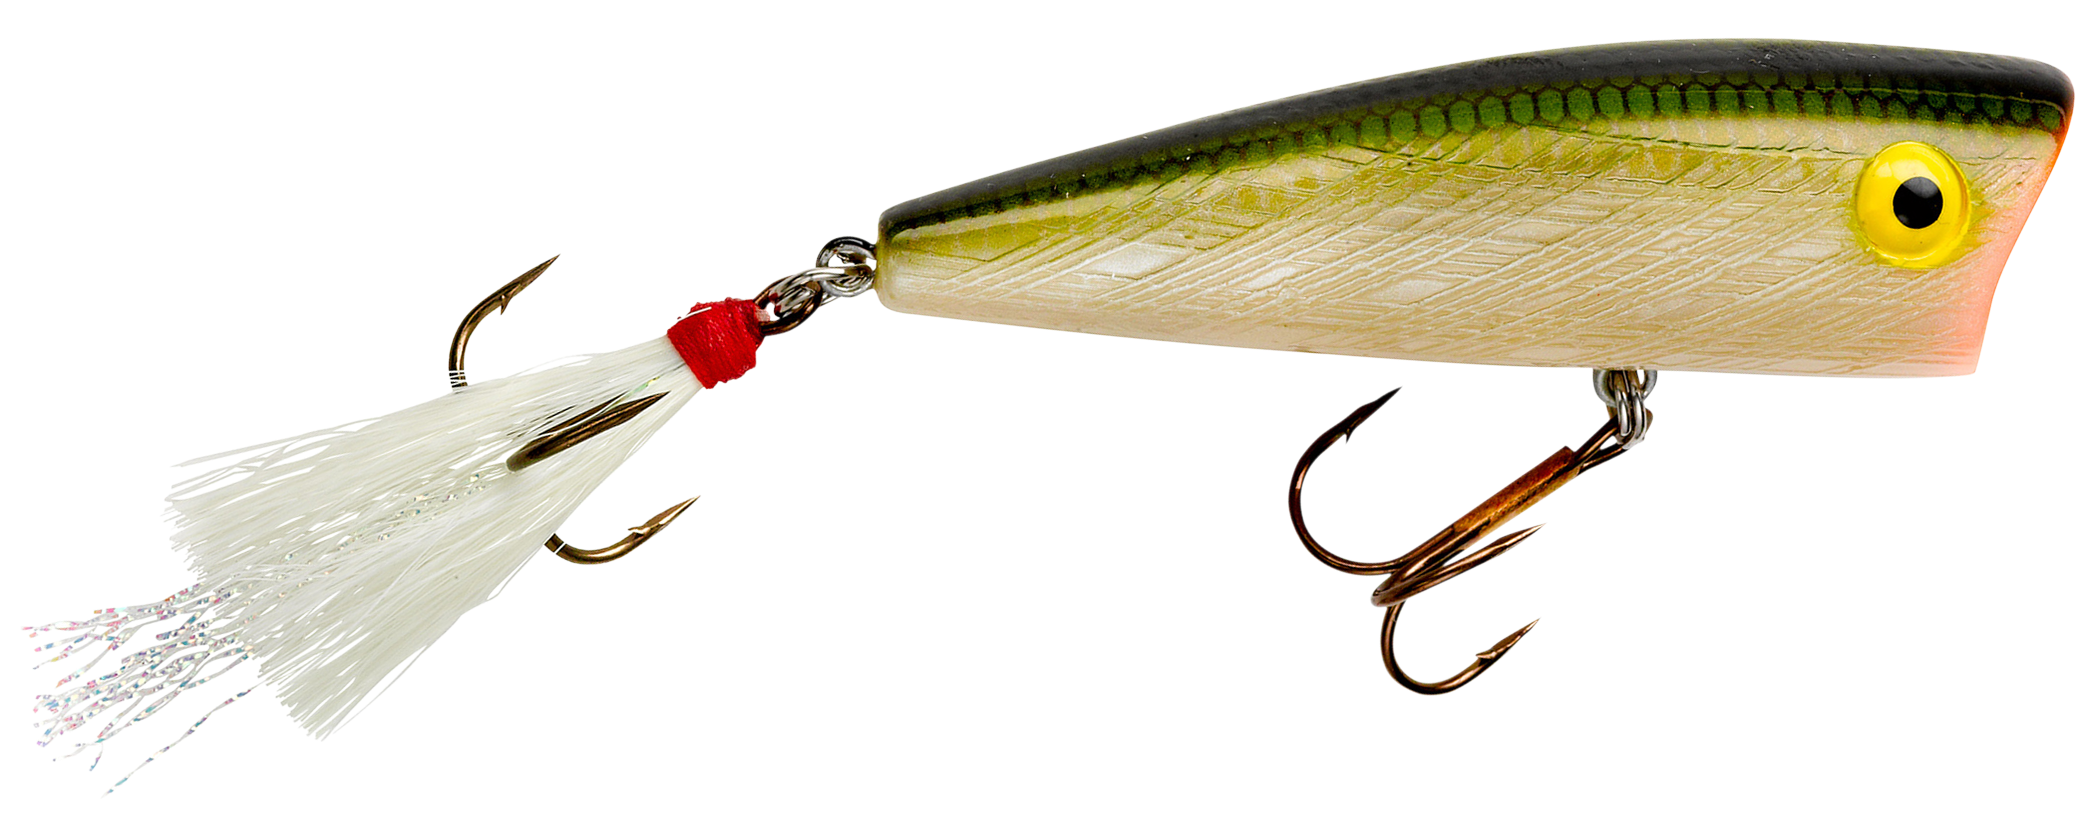  Rebel Lures Pop-R Topwater Popper Fishing Lure, Tennessee  Shad, Teeny Pop-R